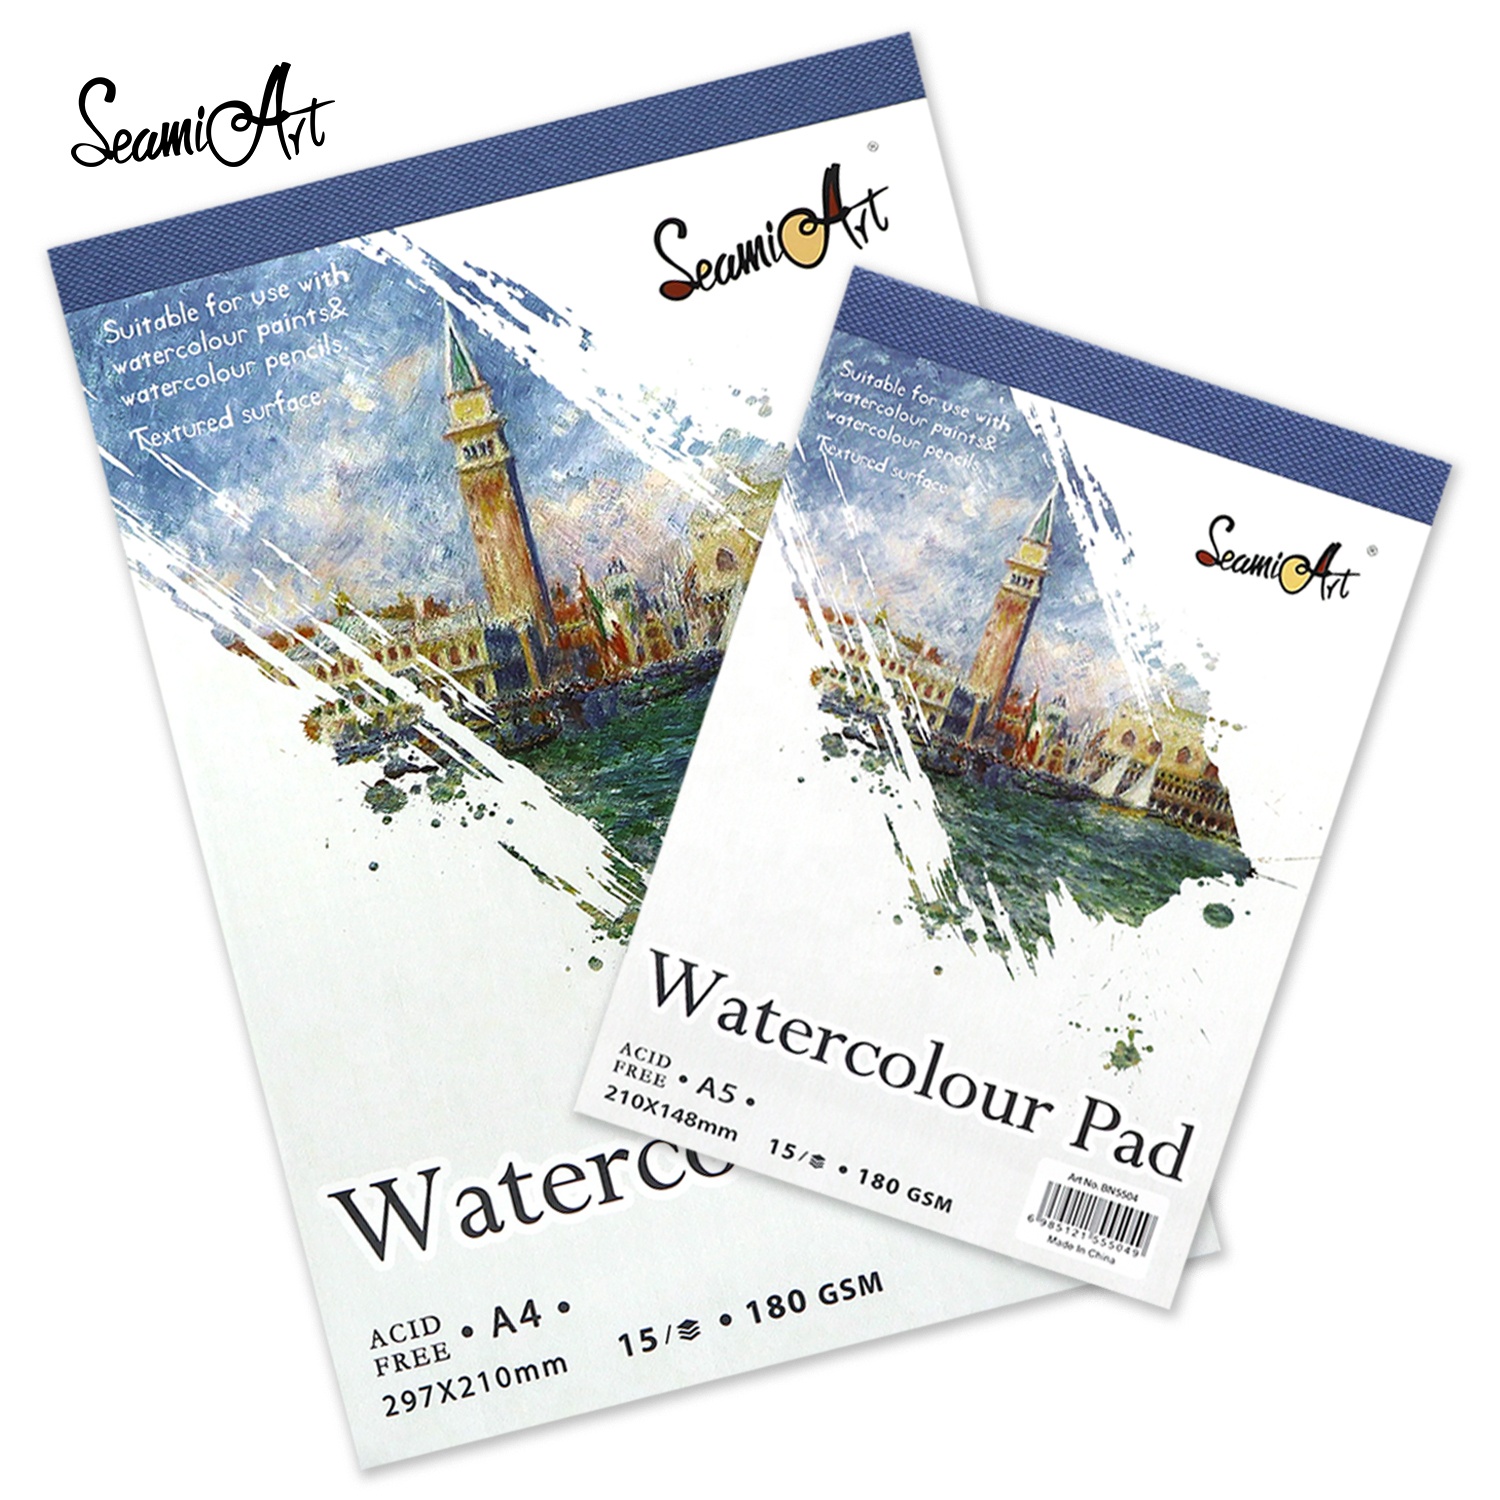 Seamiart A4/A5 180GSM Watercolor Pad drawing Paper for Watercolor/Gouache/Acrylic Wood Pulp Paper 15シートPapel Acuarela1